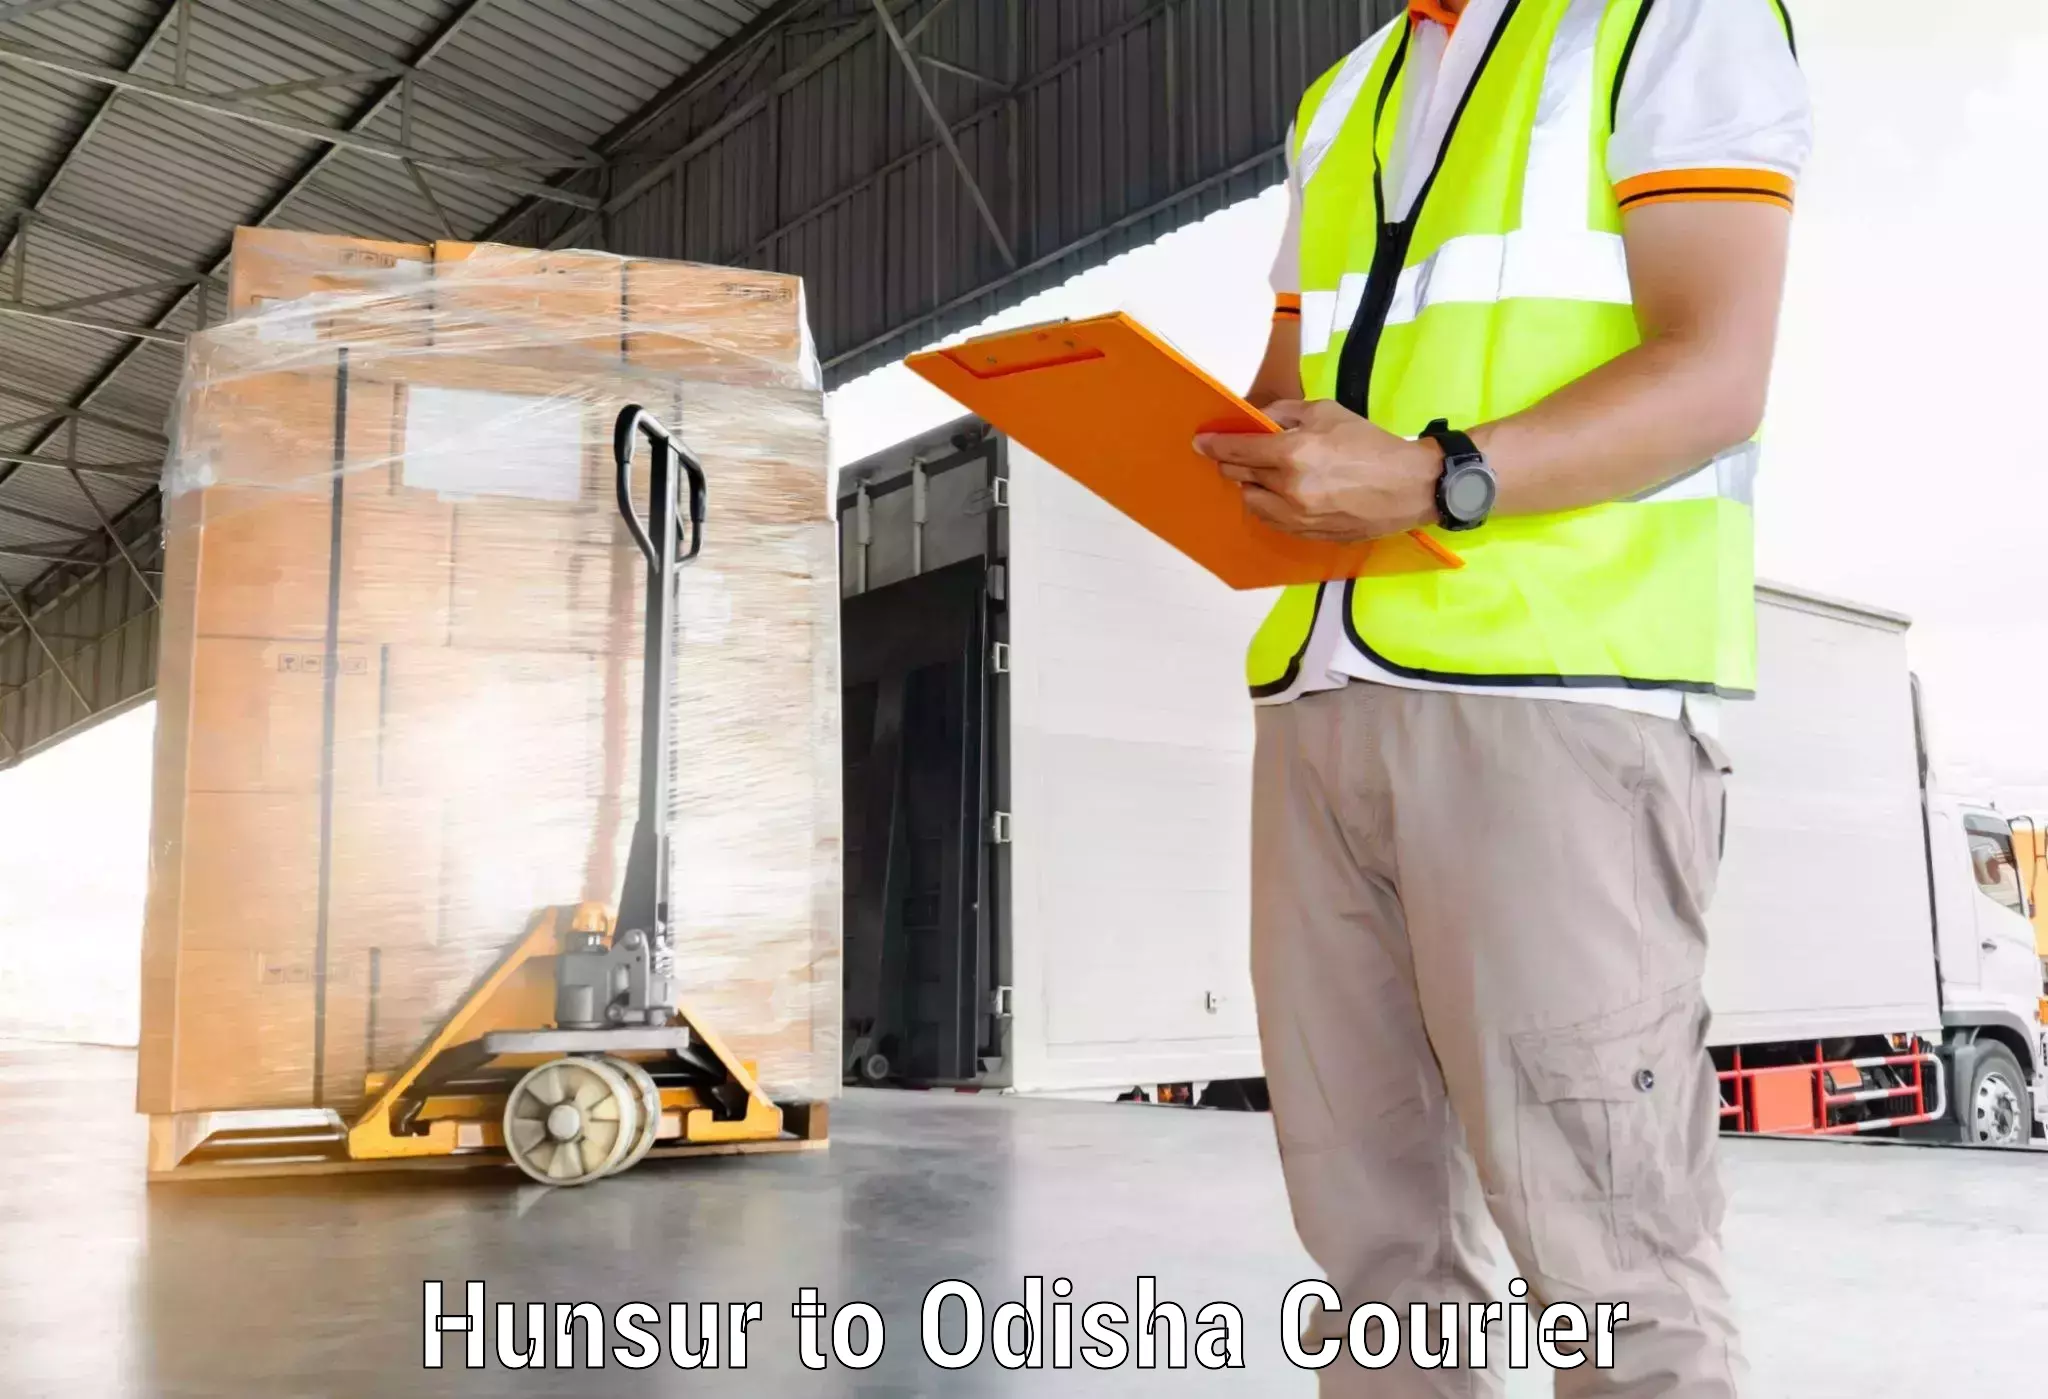 Customer-oriented courier services in Hunsur to Cuttack